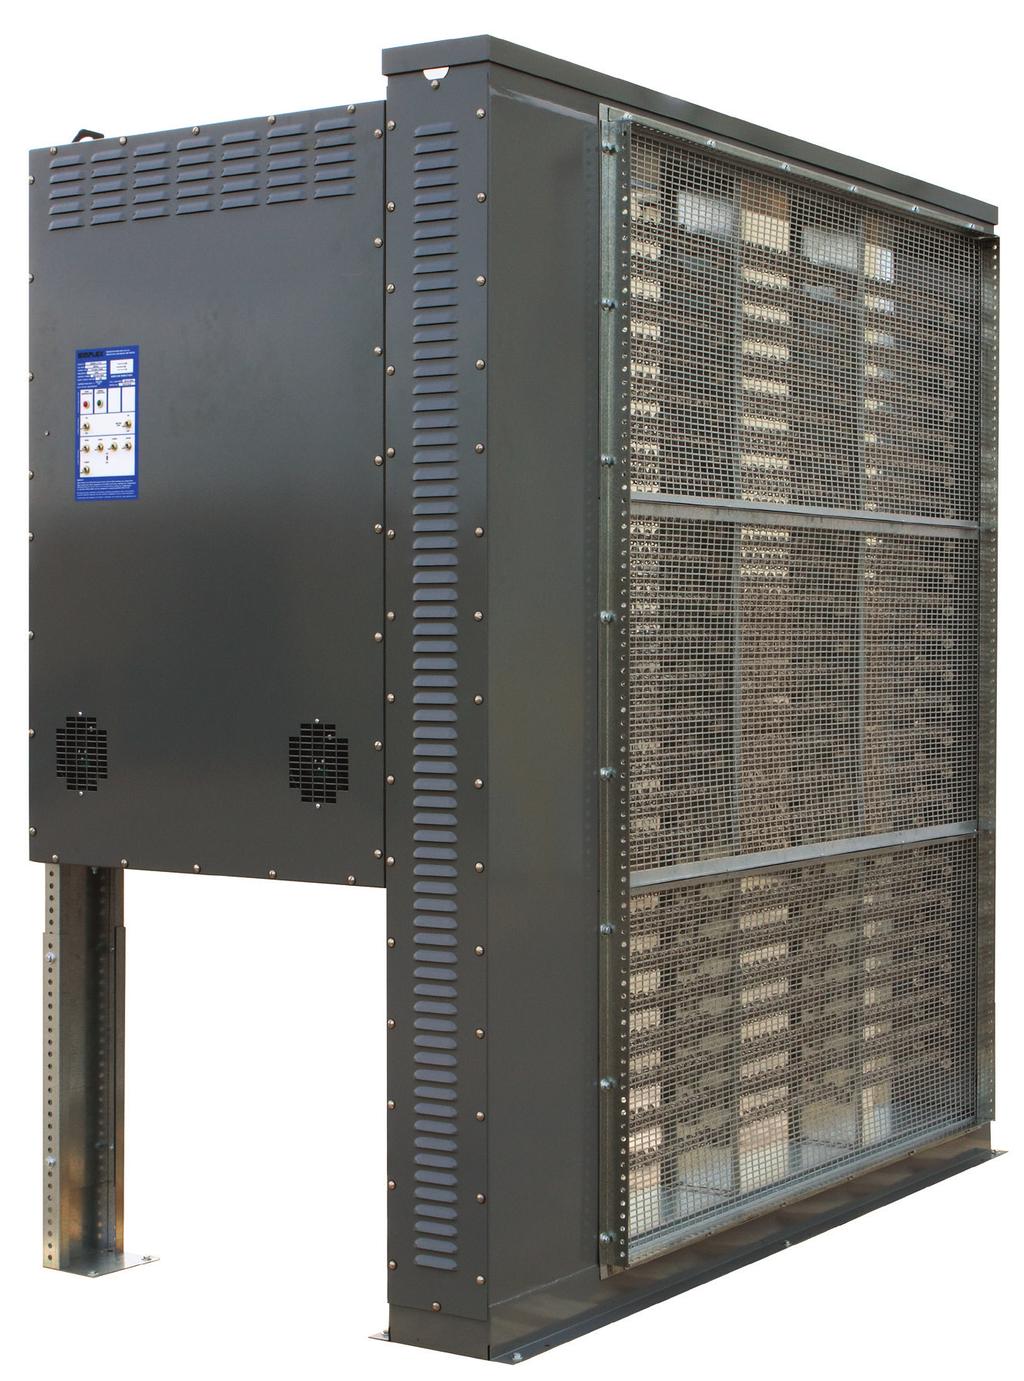 Radiator-Cooled Load Bank Description Simplex LBD Load Banks are a special form of stationary, resistive, forced air-cooled load bank which utilizes the air outflow of an engine radiator for cooling